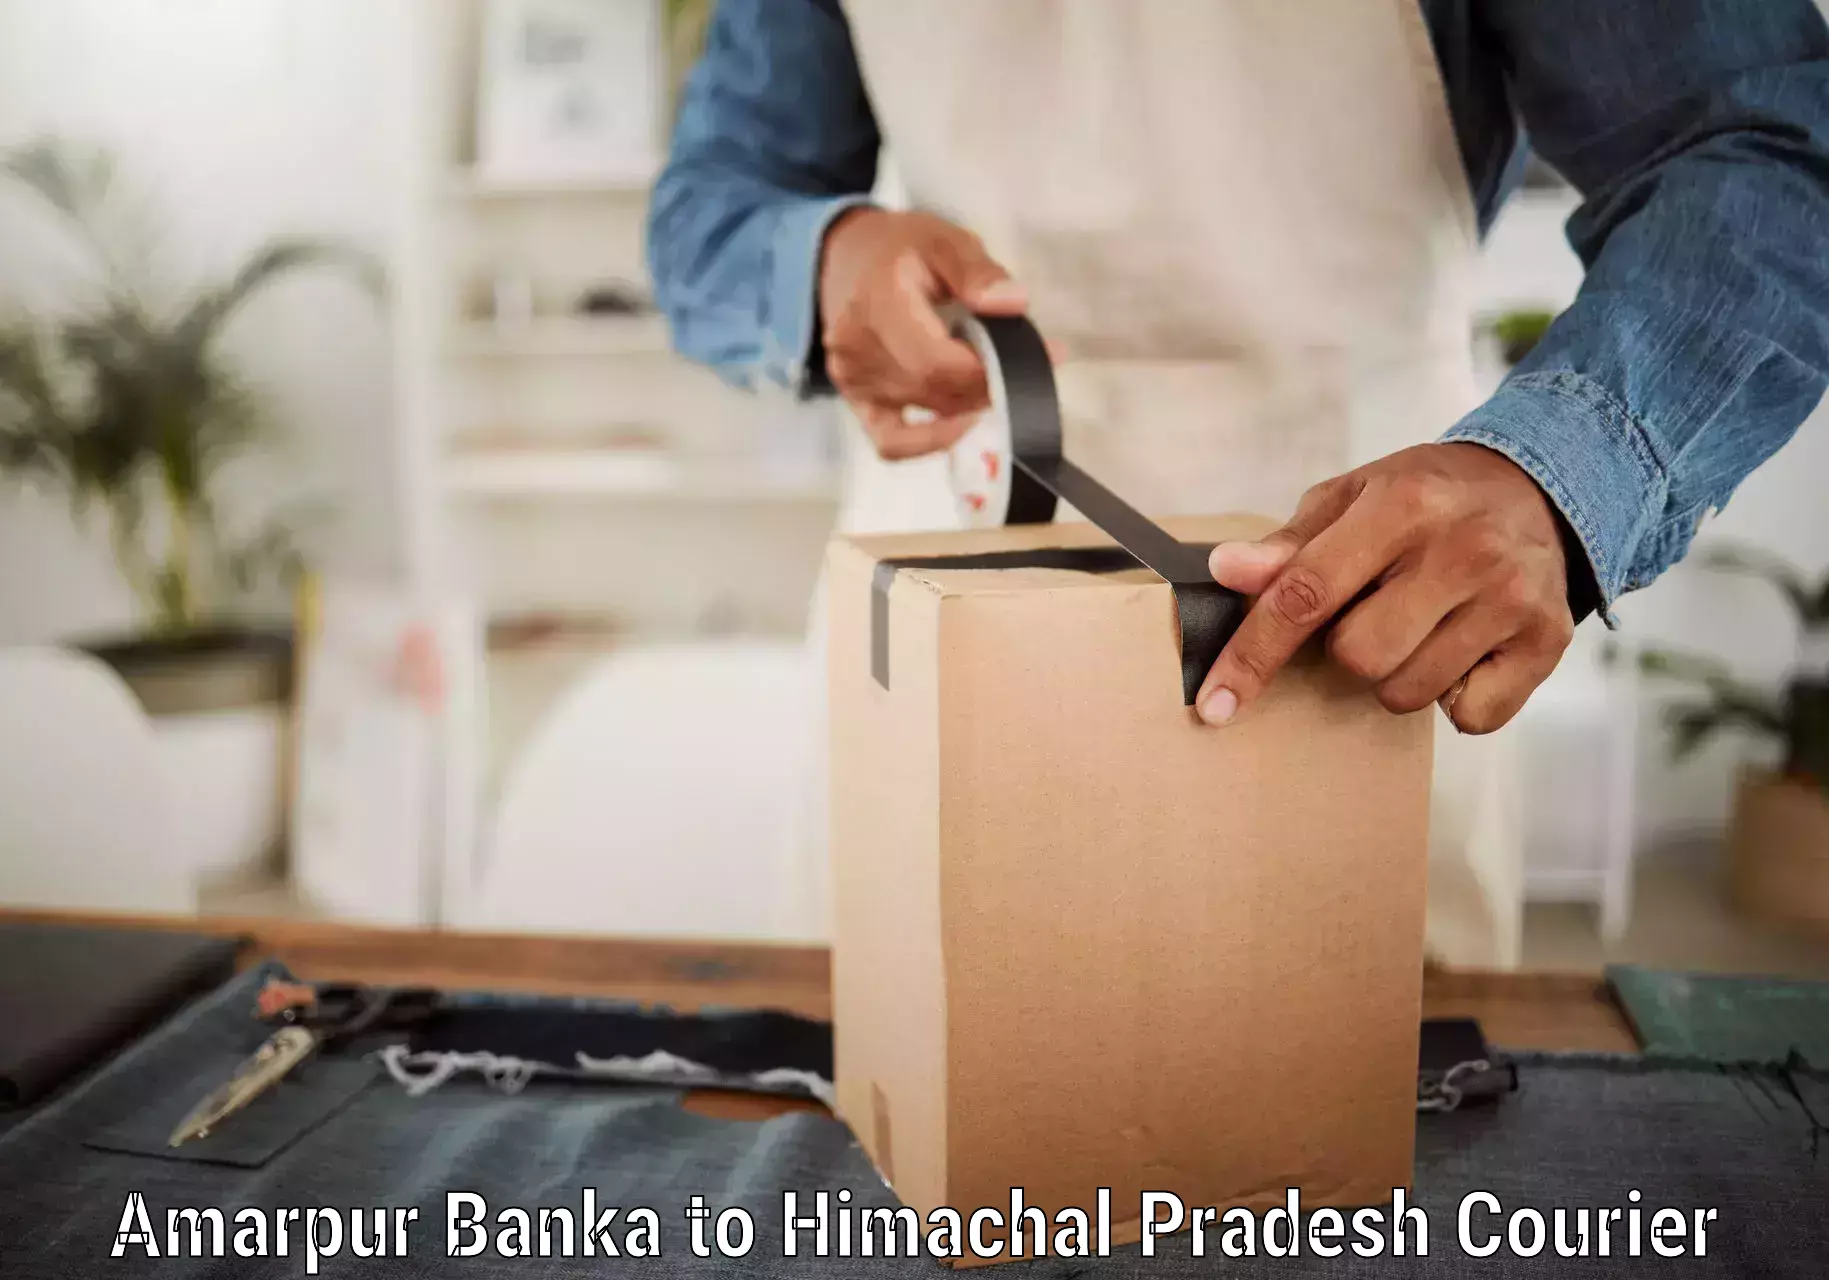 State-of-the-art courier technology Amarpur Banka to Himachal Pradesh